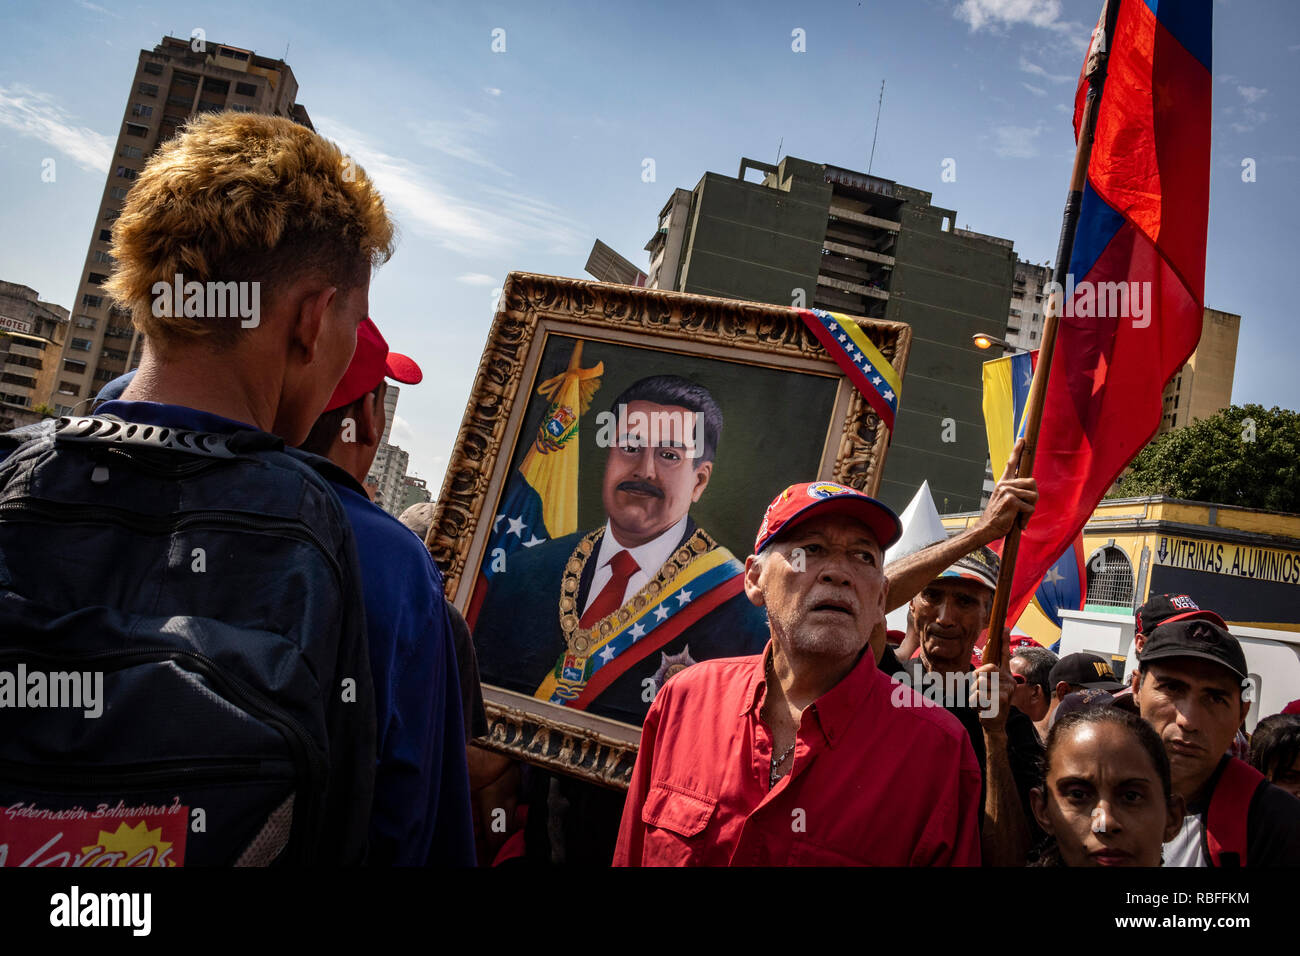 Caracas, Venezuela. 10th Jan, 2019. Supporters of the current Venezuelan government hold a portrait of President Maduro at a rally to support him. Maduro was sworn in for his second term. Numerous states, international organizations and the Venezuelan opposition spoke of an undemocratic electoral process and did not recognize the result of the last election. Credit: Rayner Pena/dpa/Alamy Live News Stock Photo